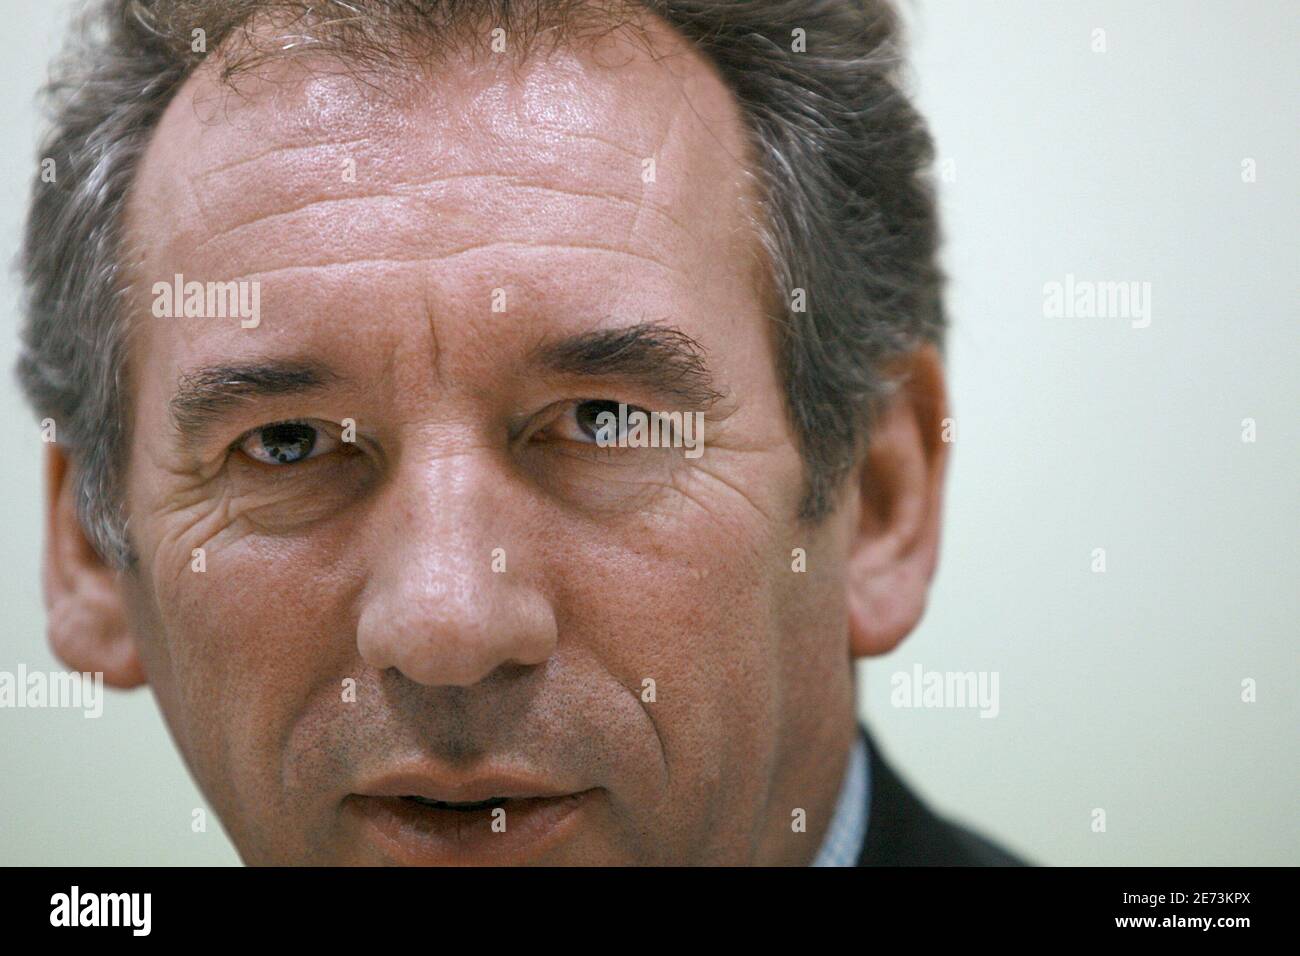 Francois Bayrou, UDF candidate for presidential elections, campaigns in Perpignan south of France on March 9, 2007. Photo by Corentin Folhen/ABACAPRESS.COM Stock Photo